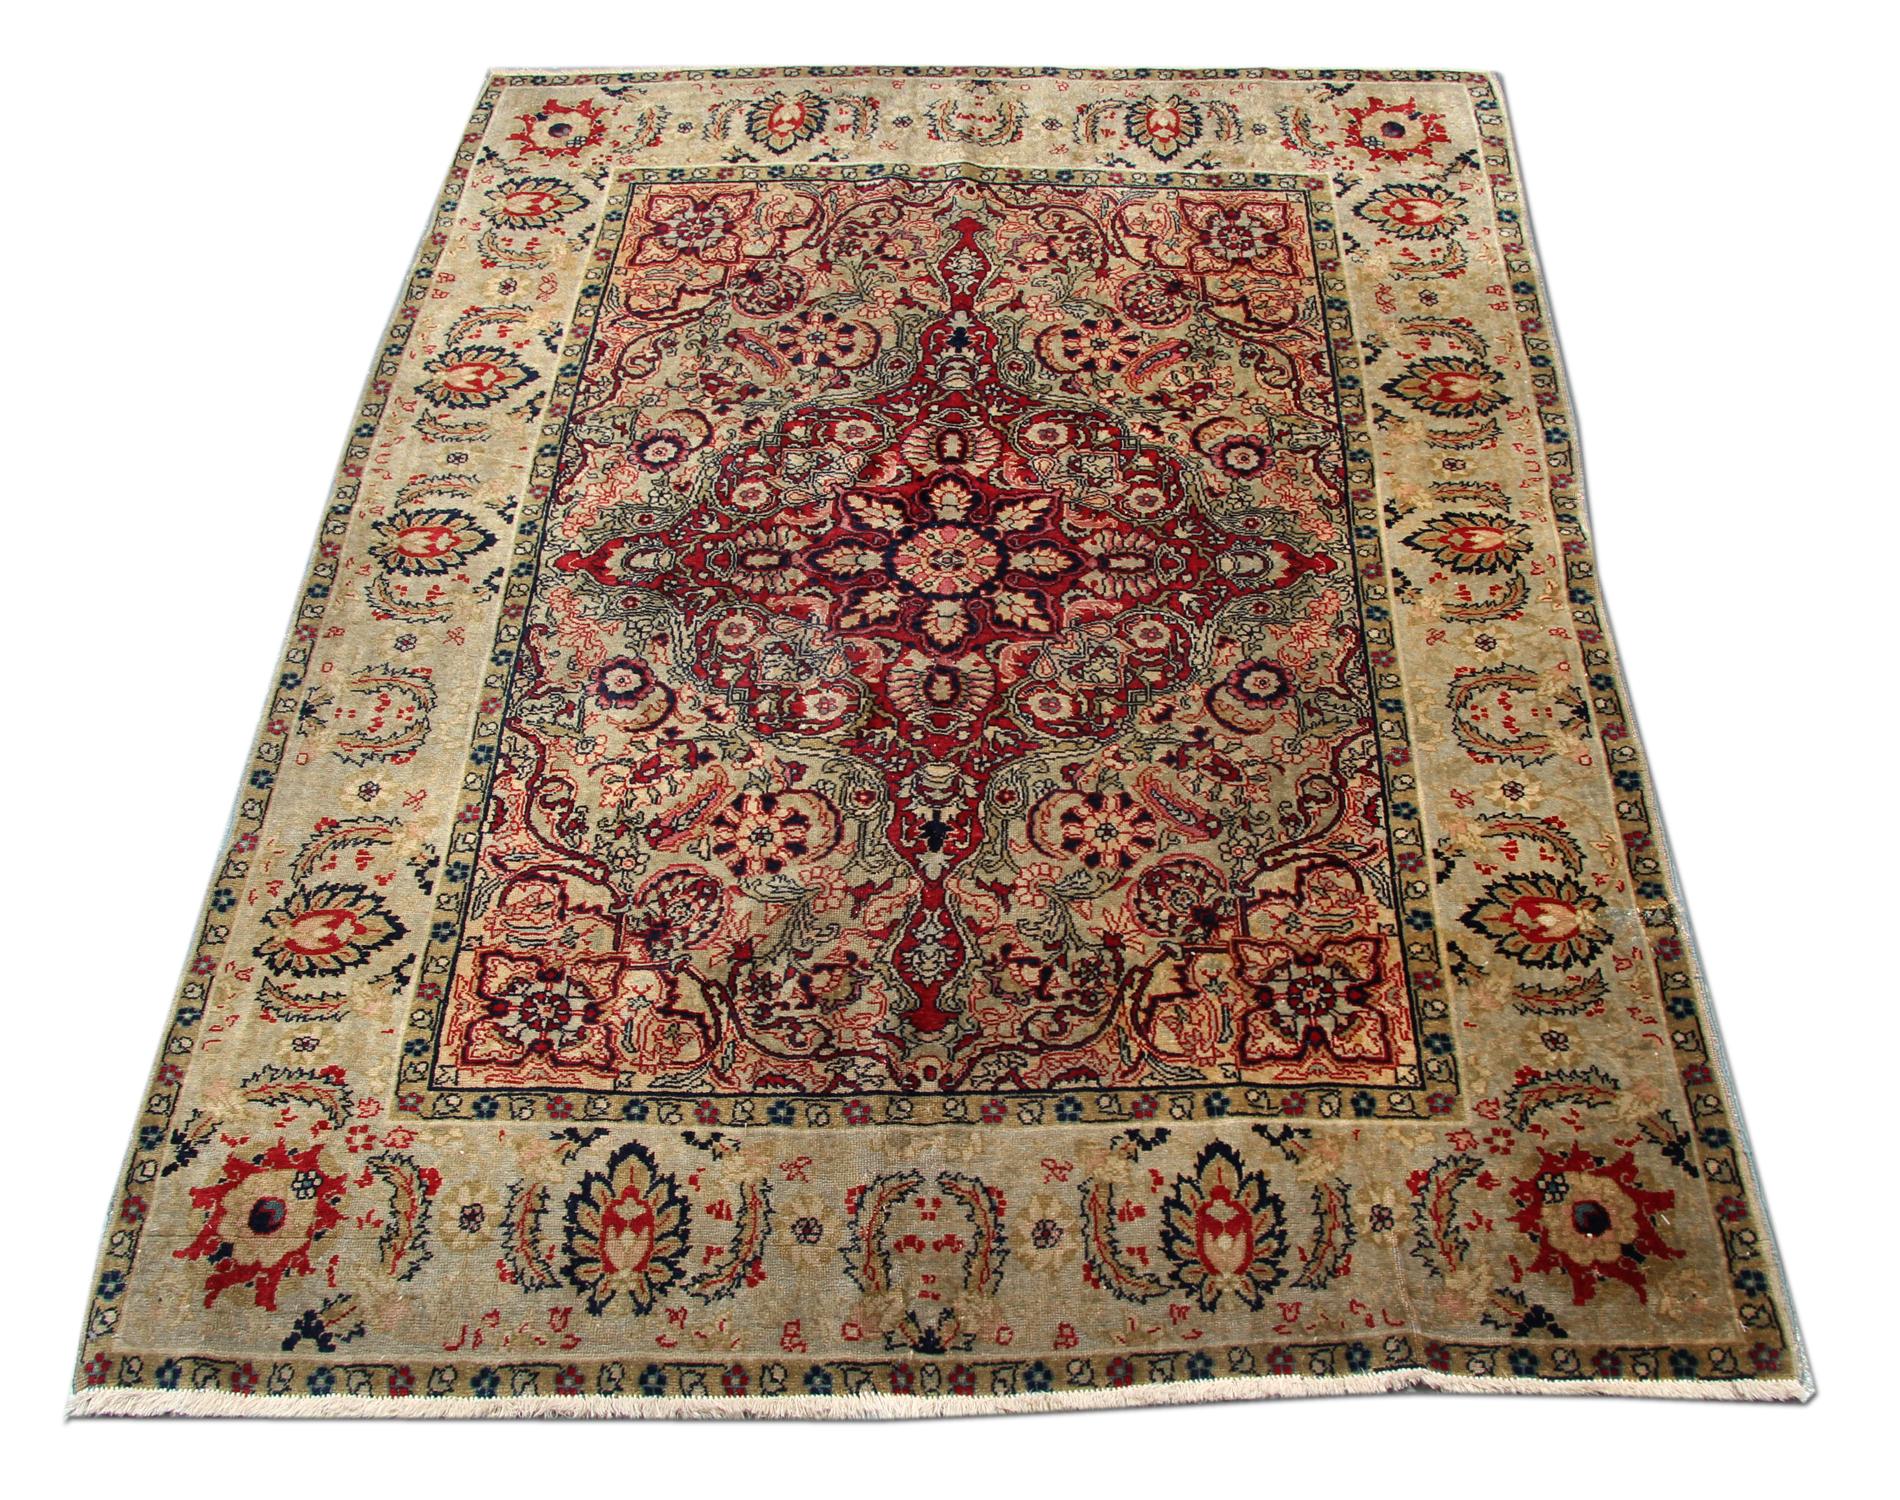 These handmade carpet luxury rugs look beautiful and would stand out as dining room rugs or bedroom rugs as interior design object. These washable rugs are one of a kind and cannot be found in every rug warehouse or rug store. This oriental rug is a